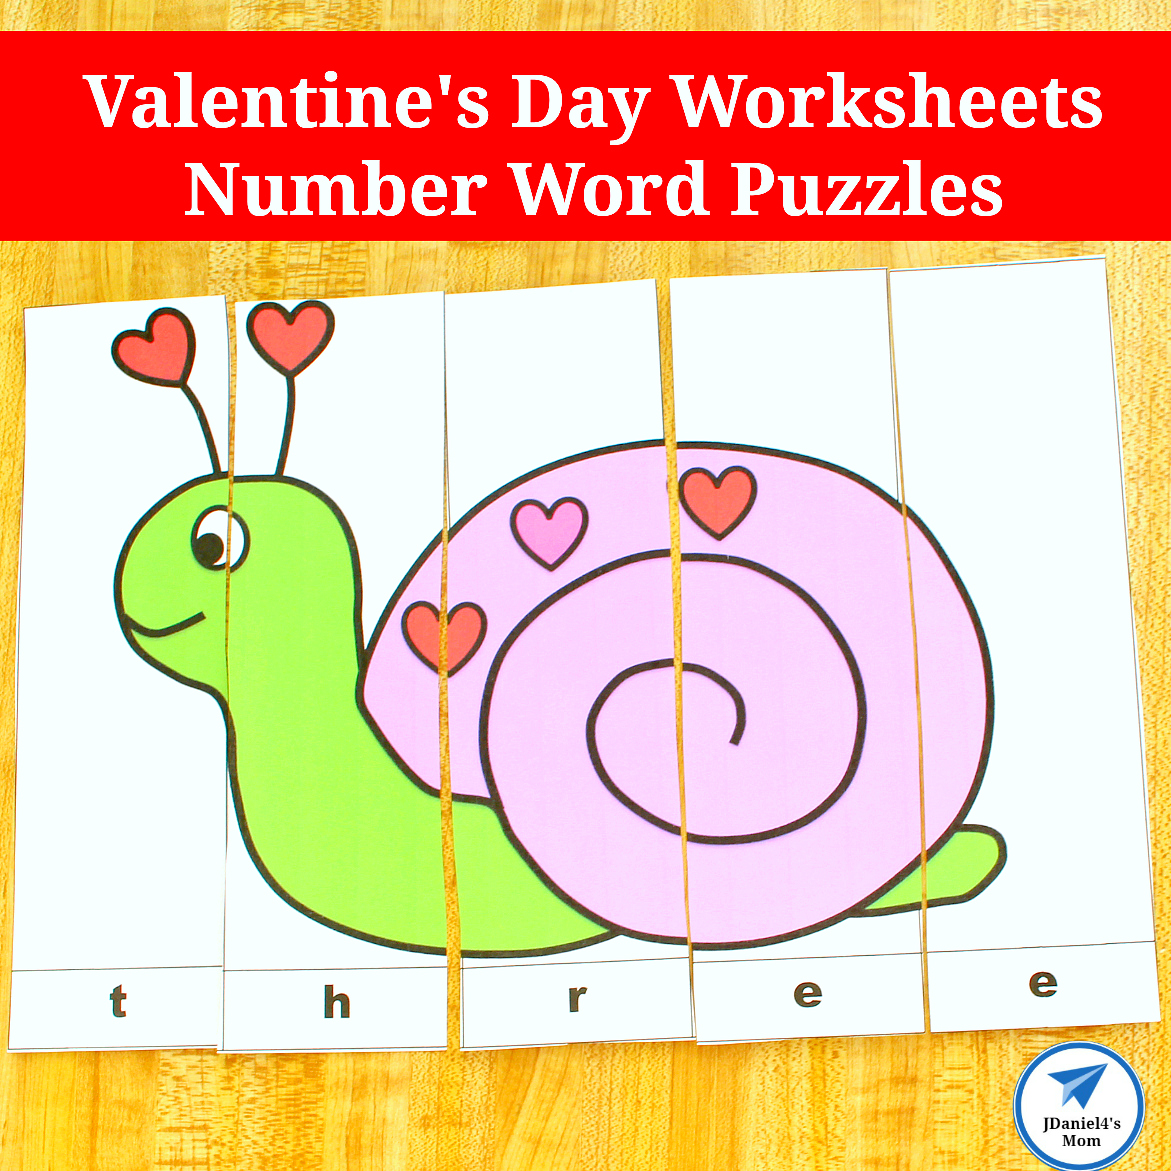 Valentine's Day Worksheets- Number Word Puzzles 